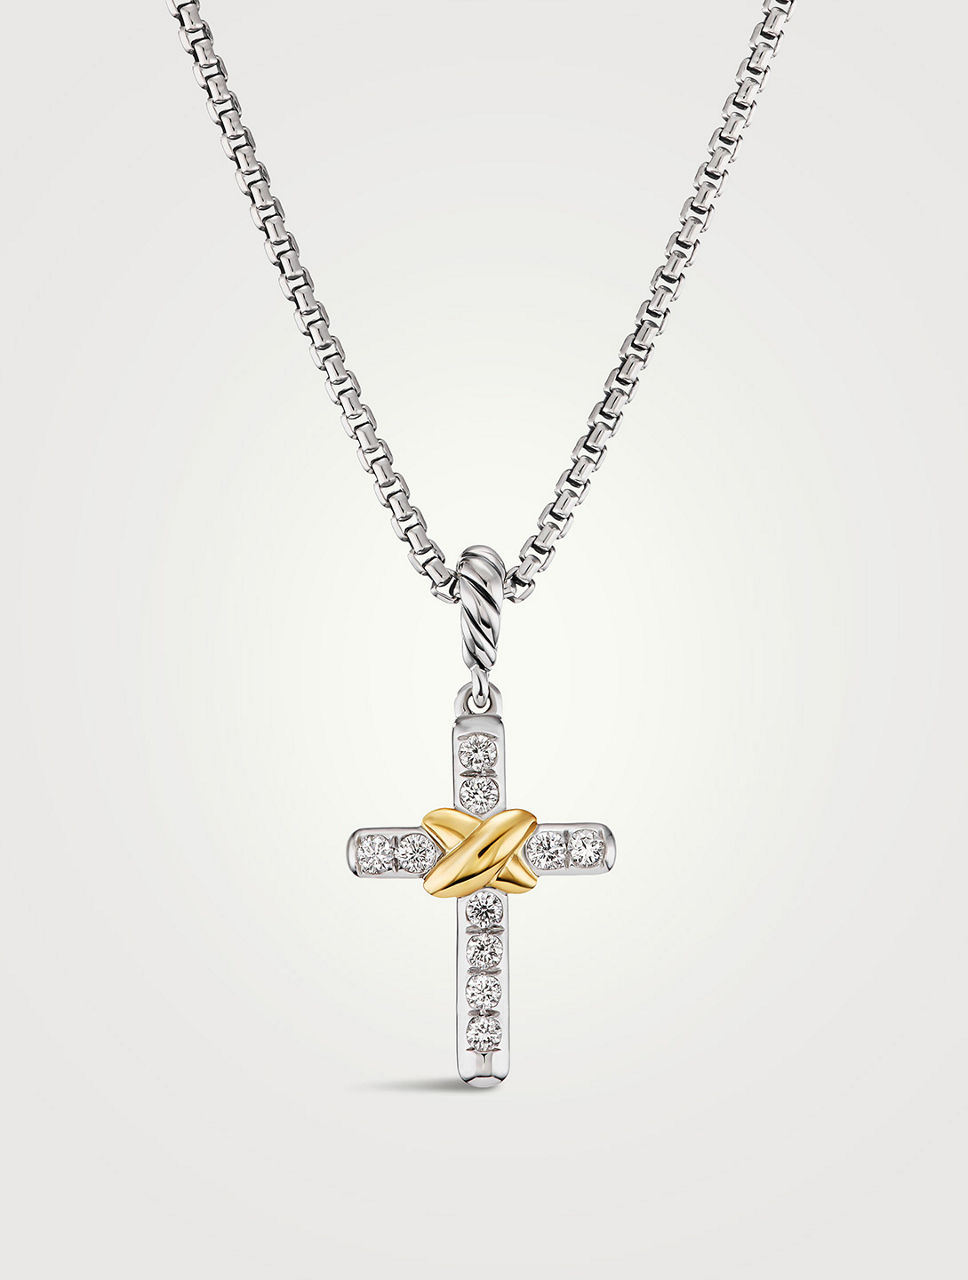 Petite Cross Necklace In Sterling Silver With 18k Yellow Gold With Diamonds, 20.8mm